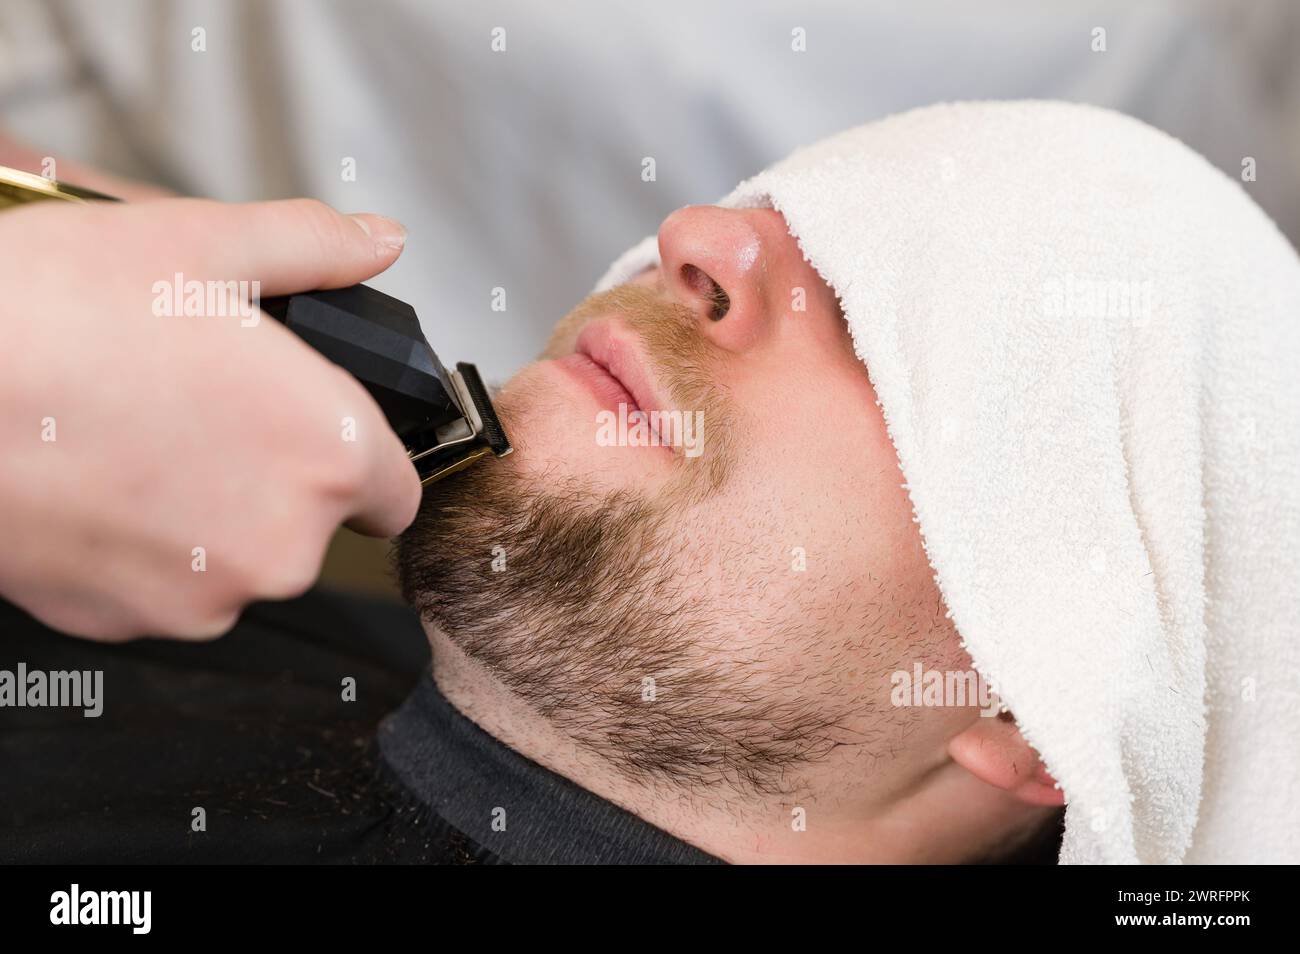 The client's head is covered with a towel during a beard trim. Shortening the length of the beard from the sides by the master for the client. Stock Photo